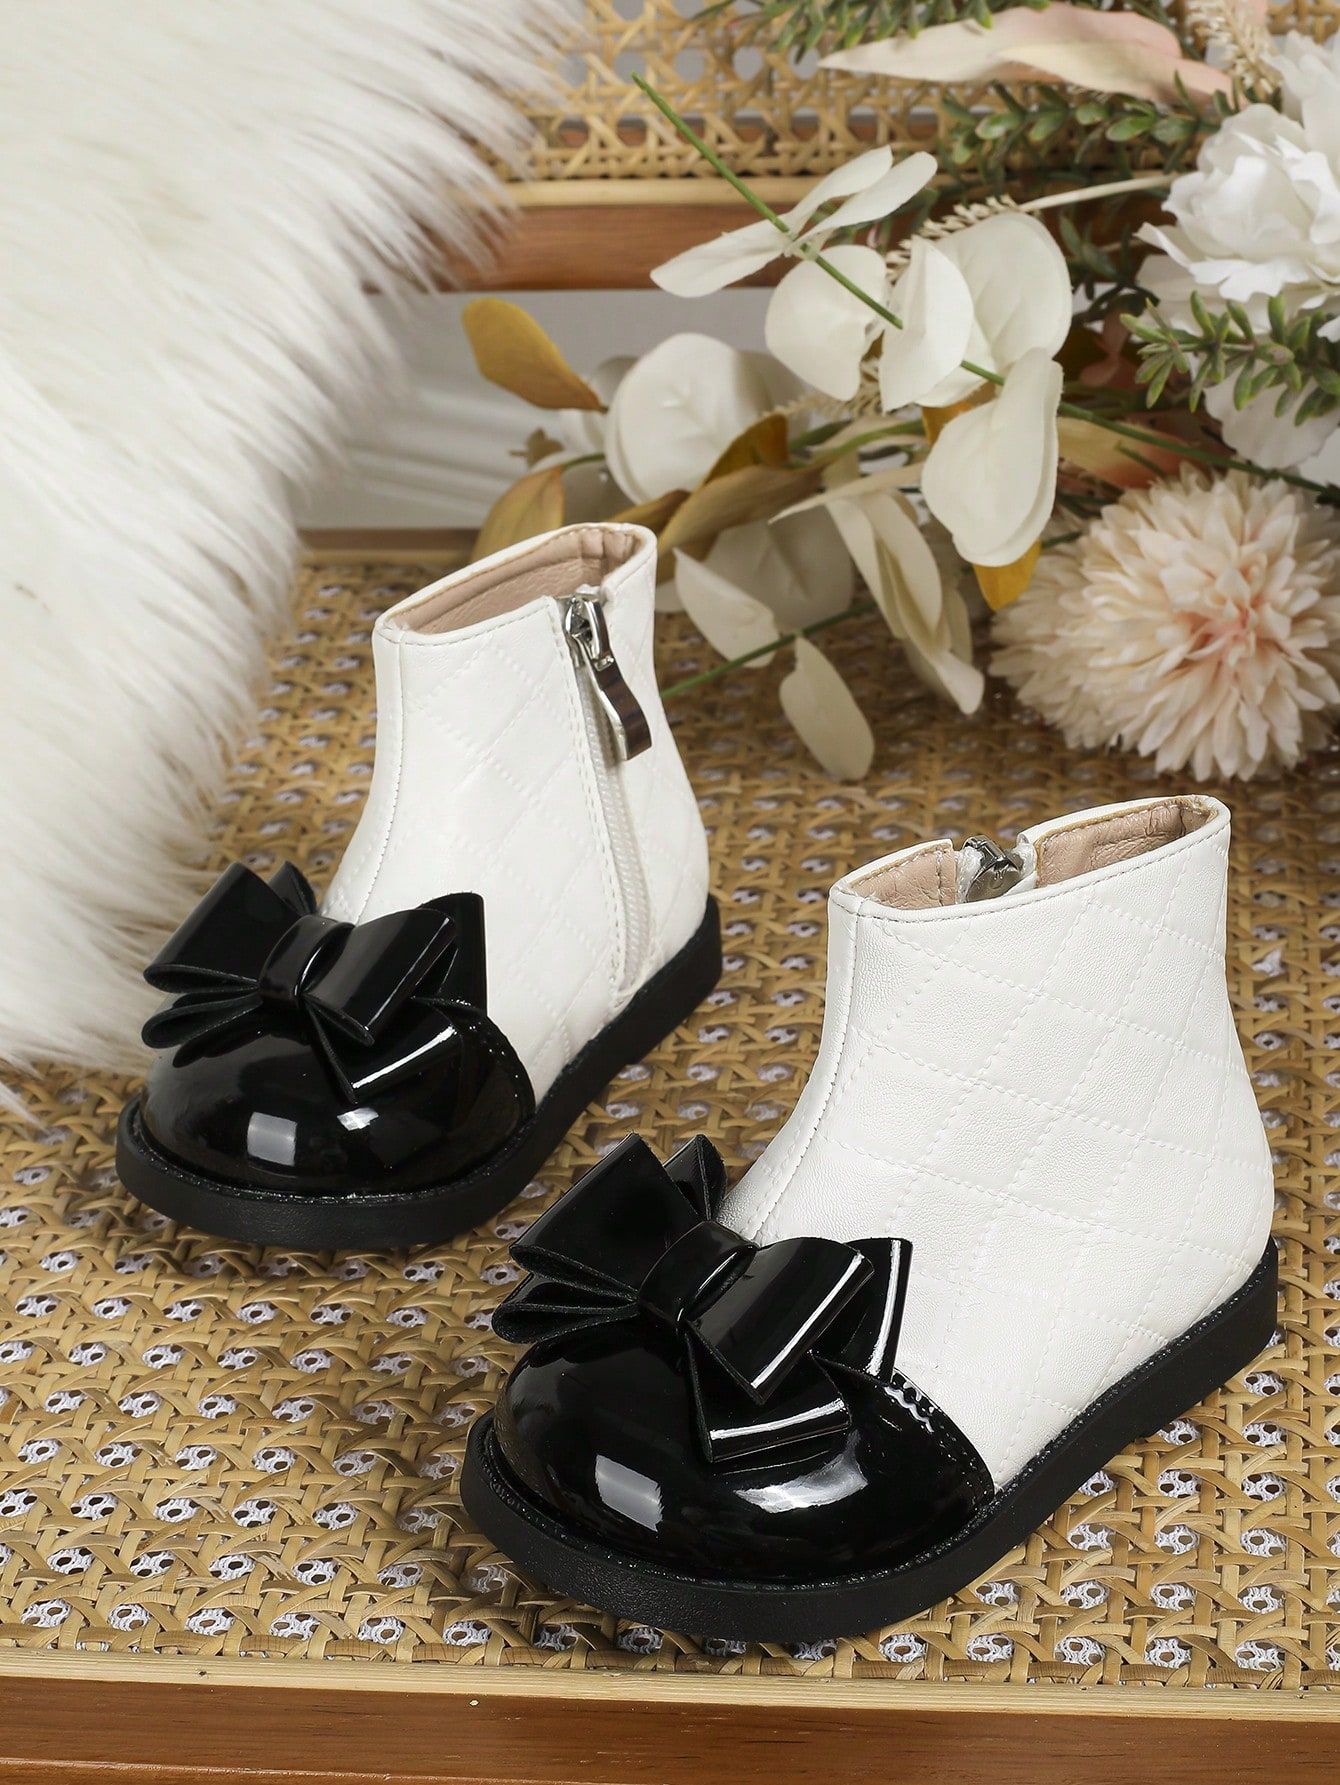 Girls' Autumn & Winter Black & White Color-block British Style Flat Boots With Lovely Bowknot Det... | SHEIN